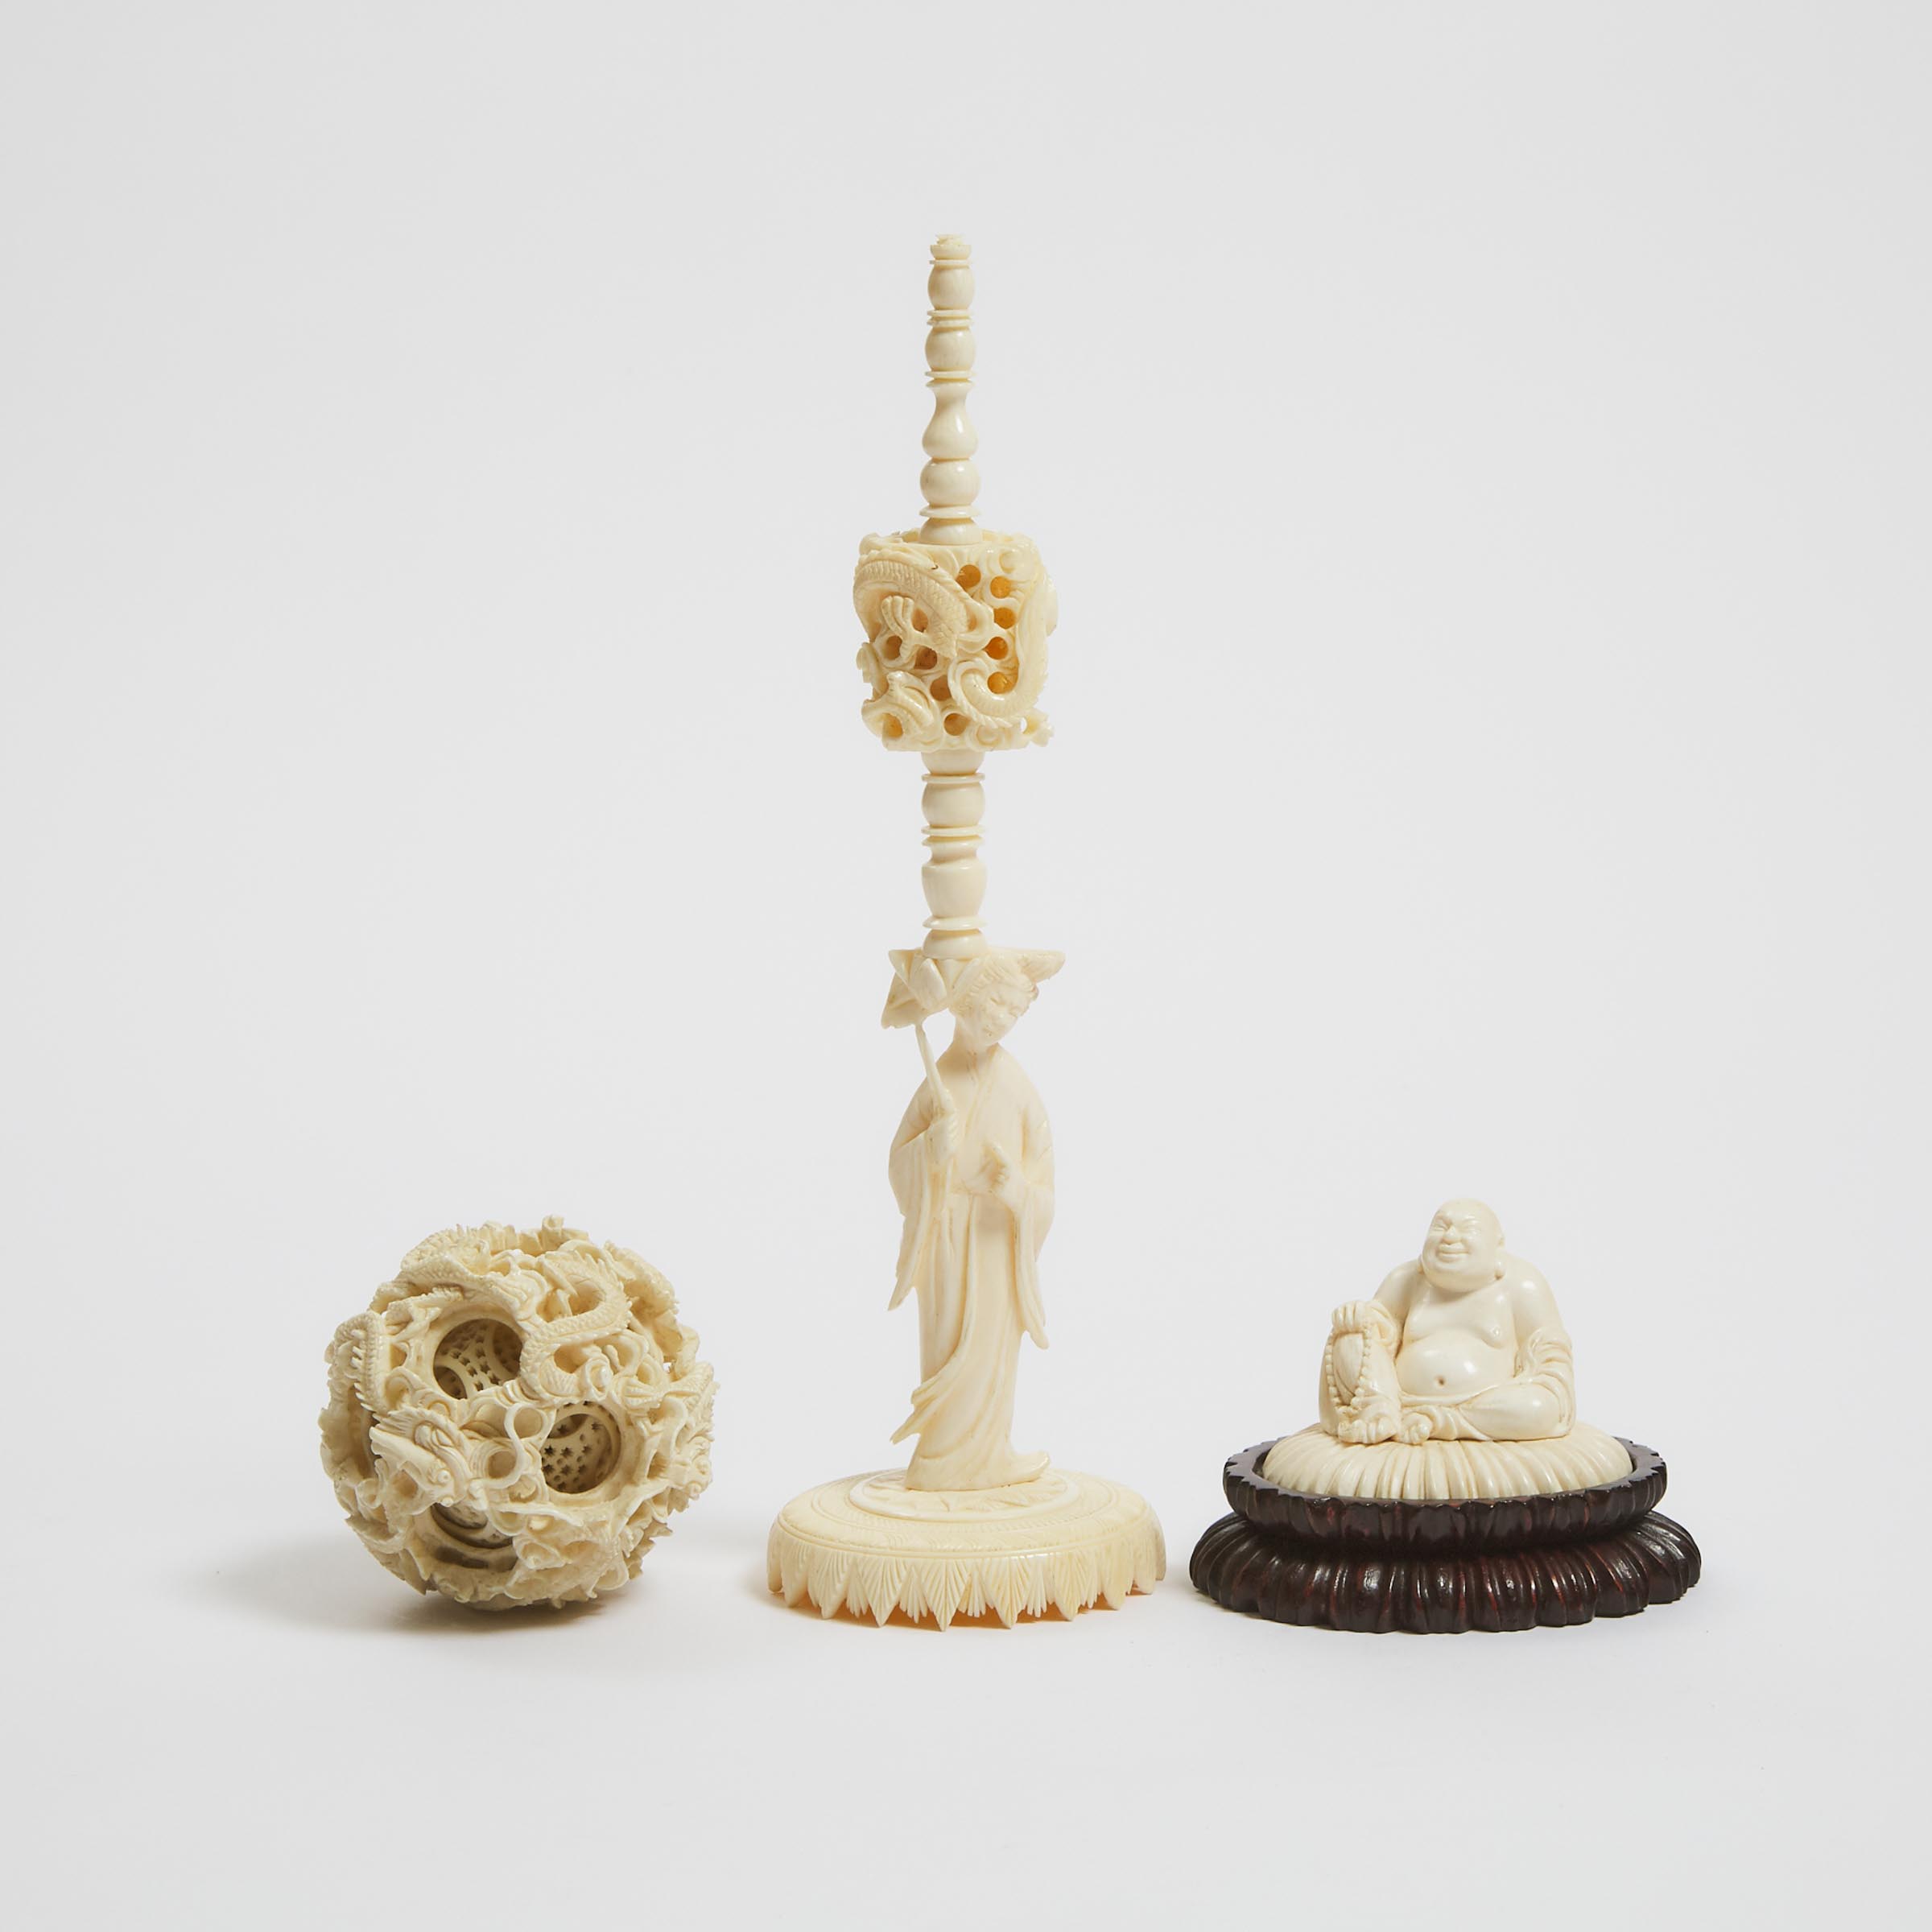 An Ivory Puzzle Ball and Stand, Together With a Carving of Budai, Late 19th/Early 20th Century